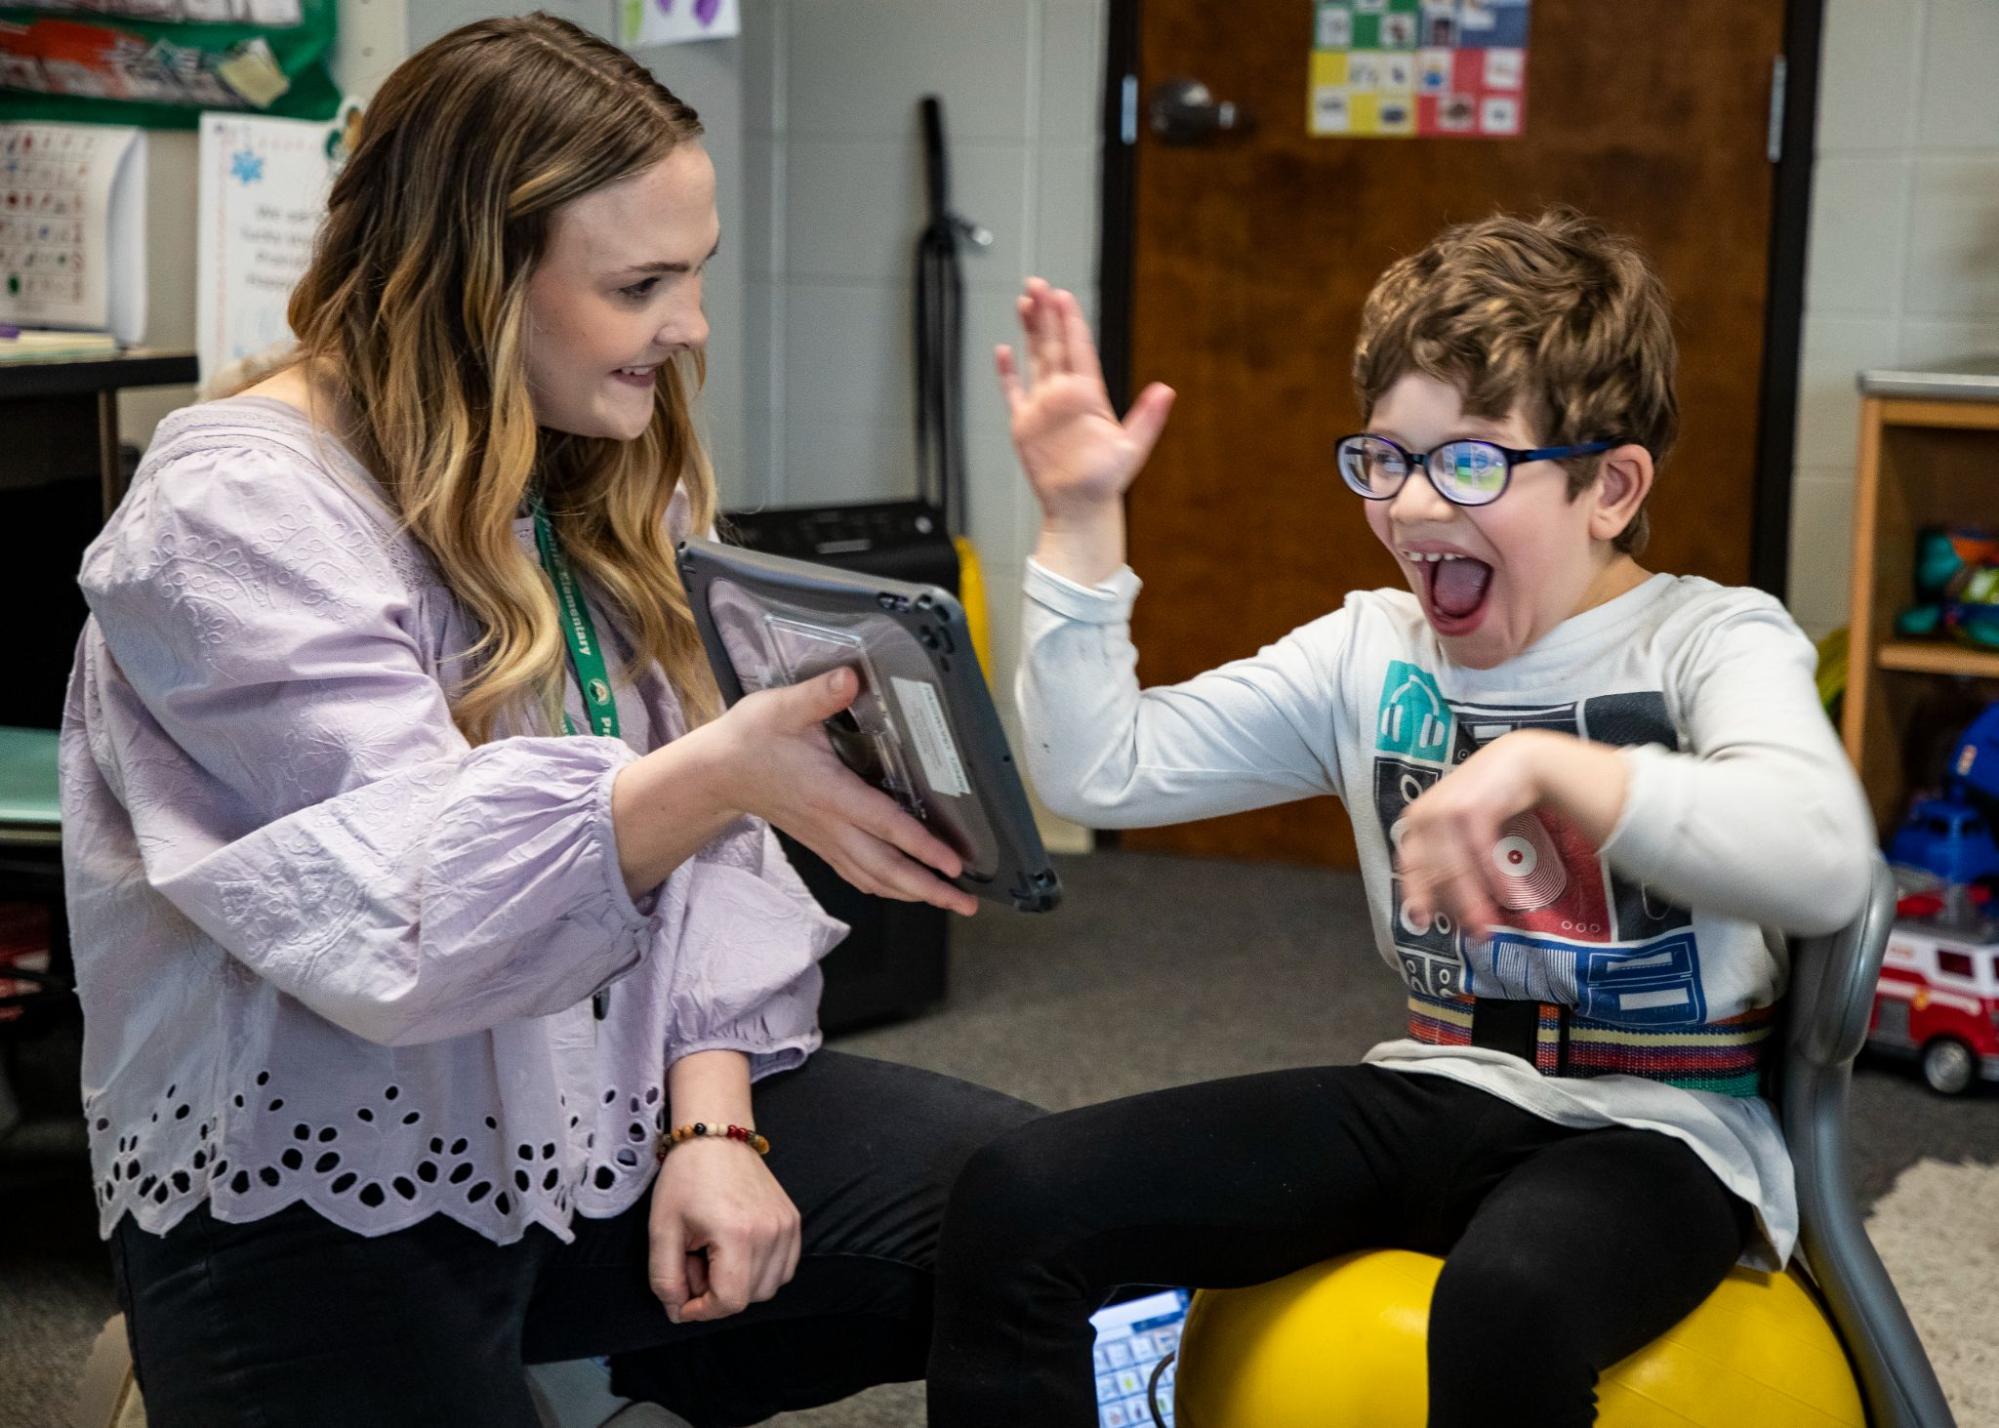 In a classroom, a teacher holds up an AAC device to a student who is excited and smiling.